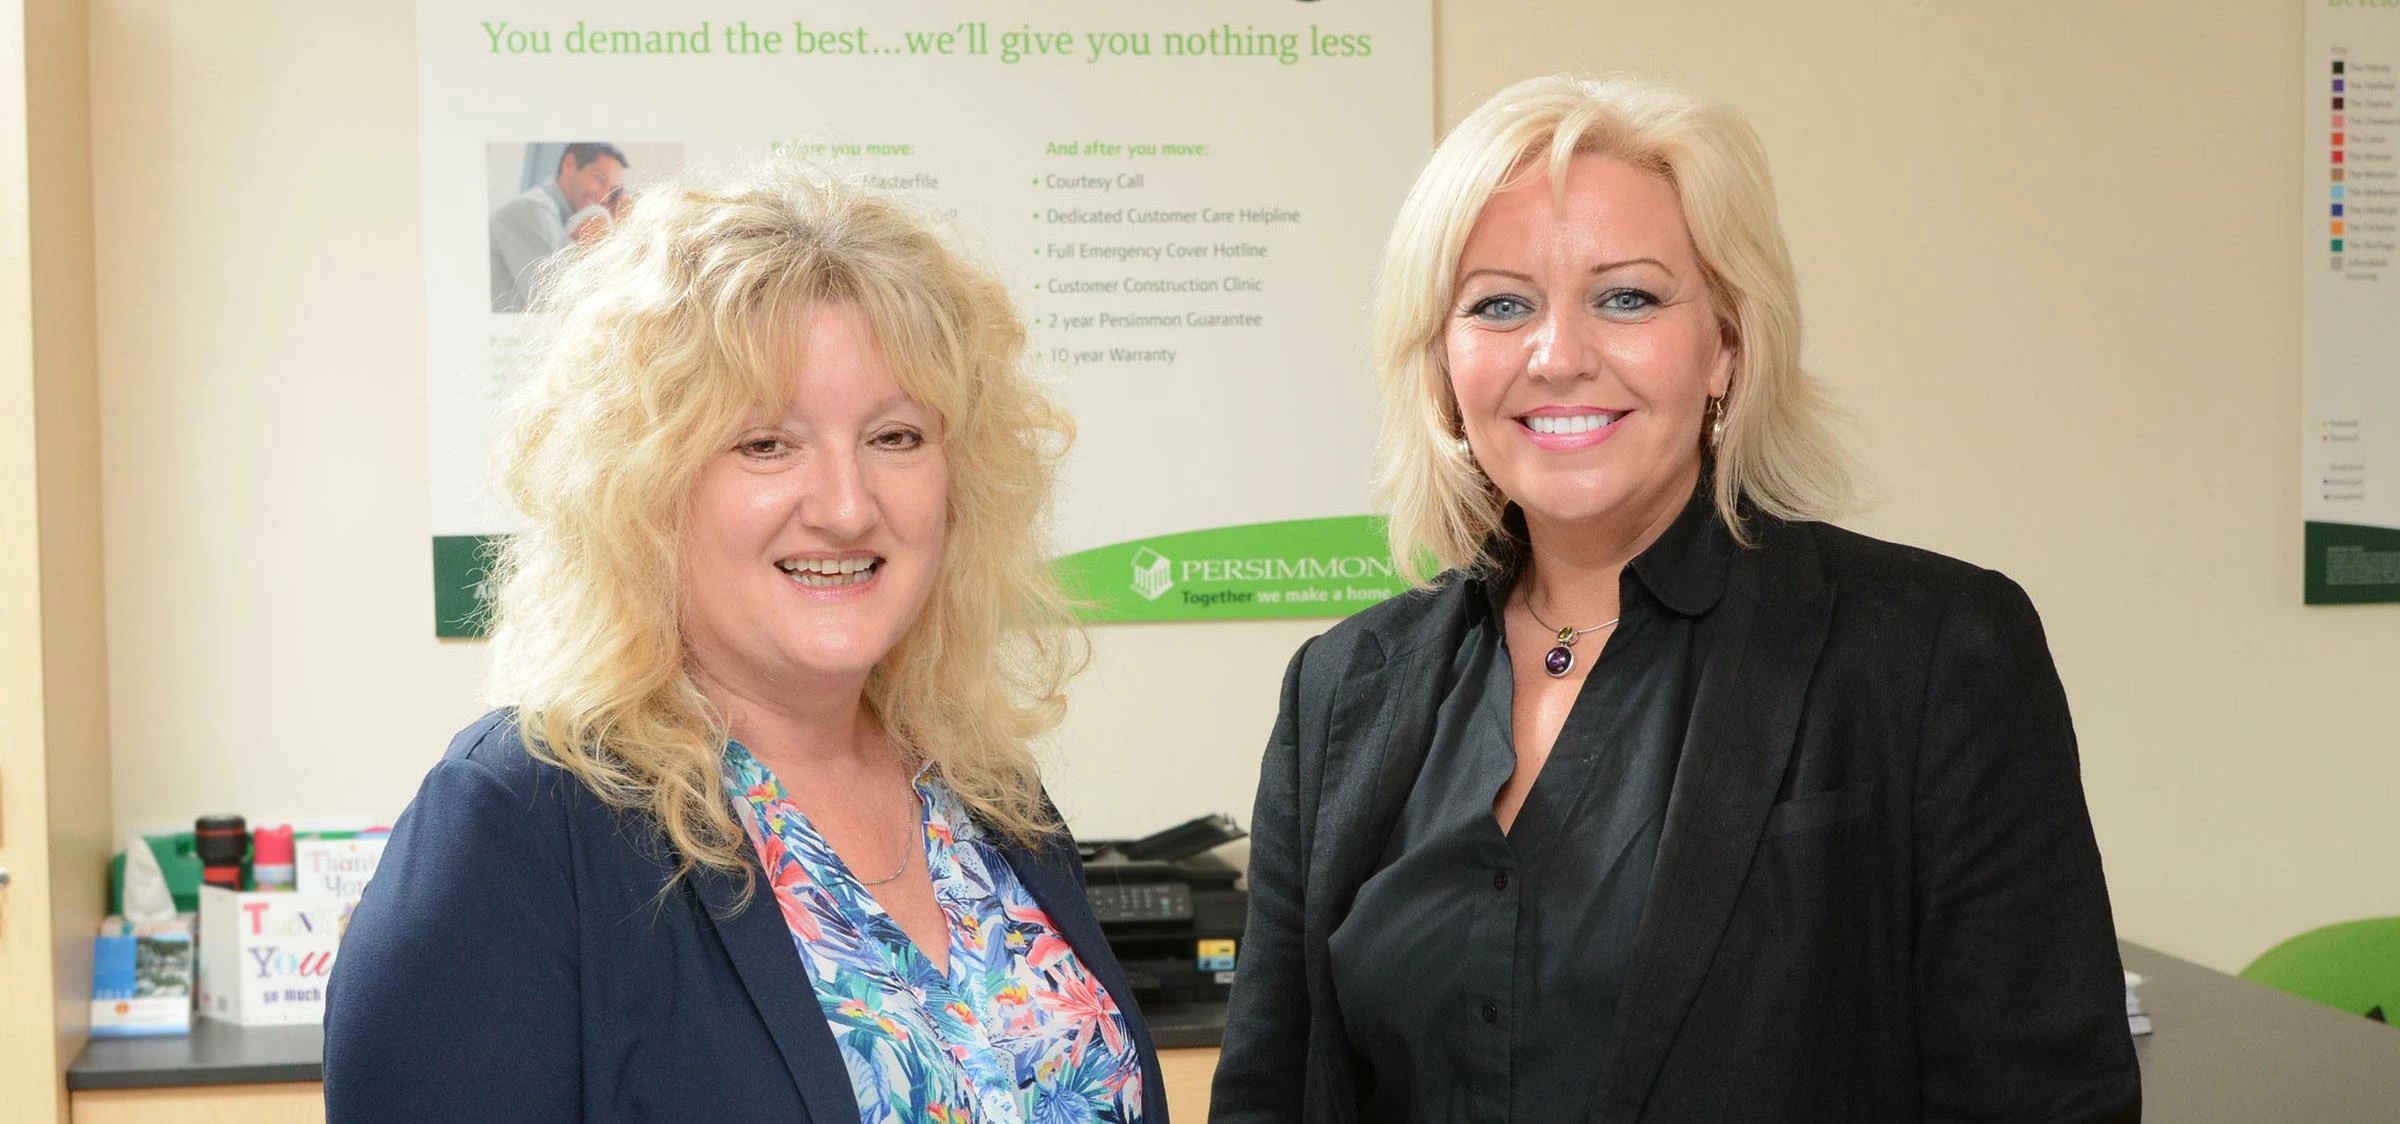 Debbie Martindale, left, alongside Tracey Gallacher from Persimmon Homes